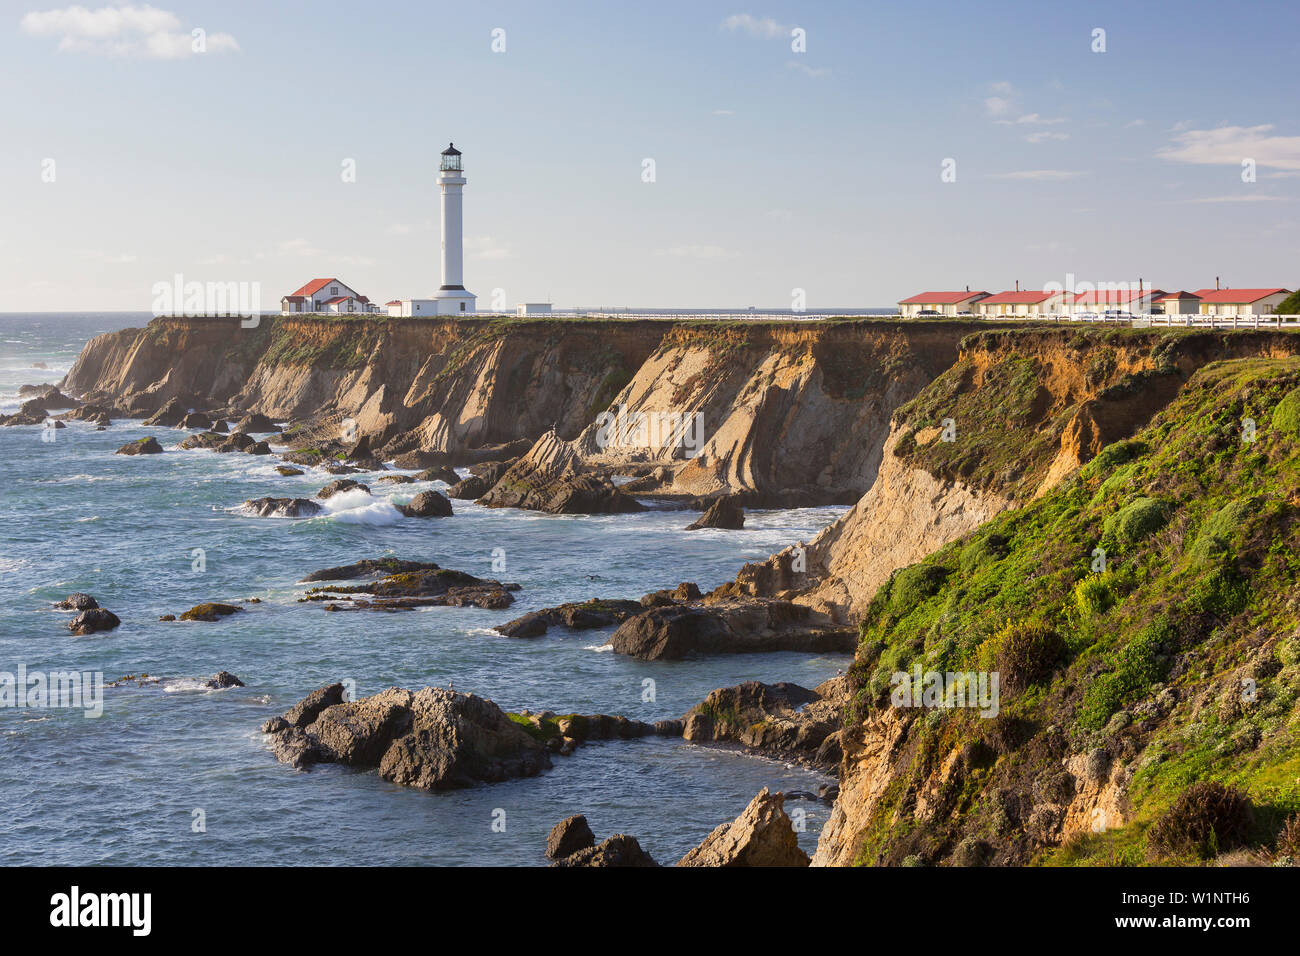 Point Arena Lighthouse and Museum, Arena Rock Marine Natural Preserve, California, United States Stock Photo